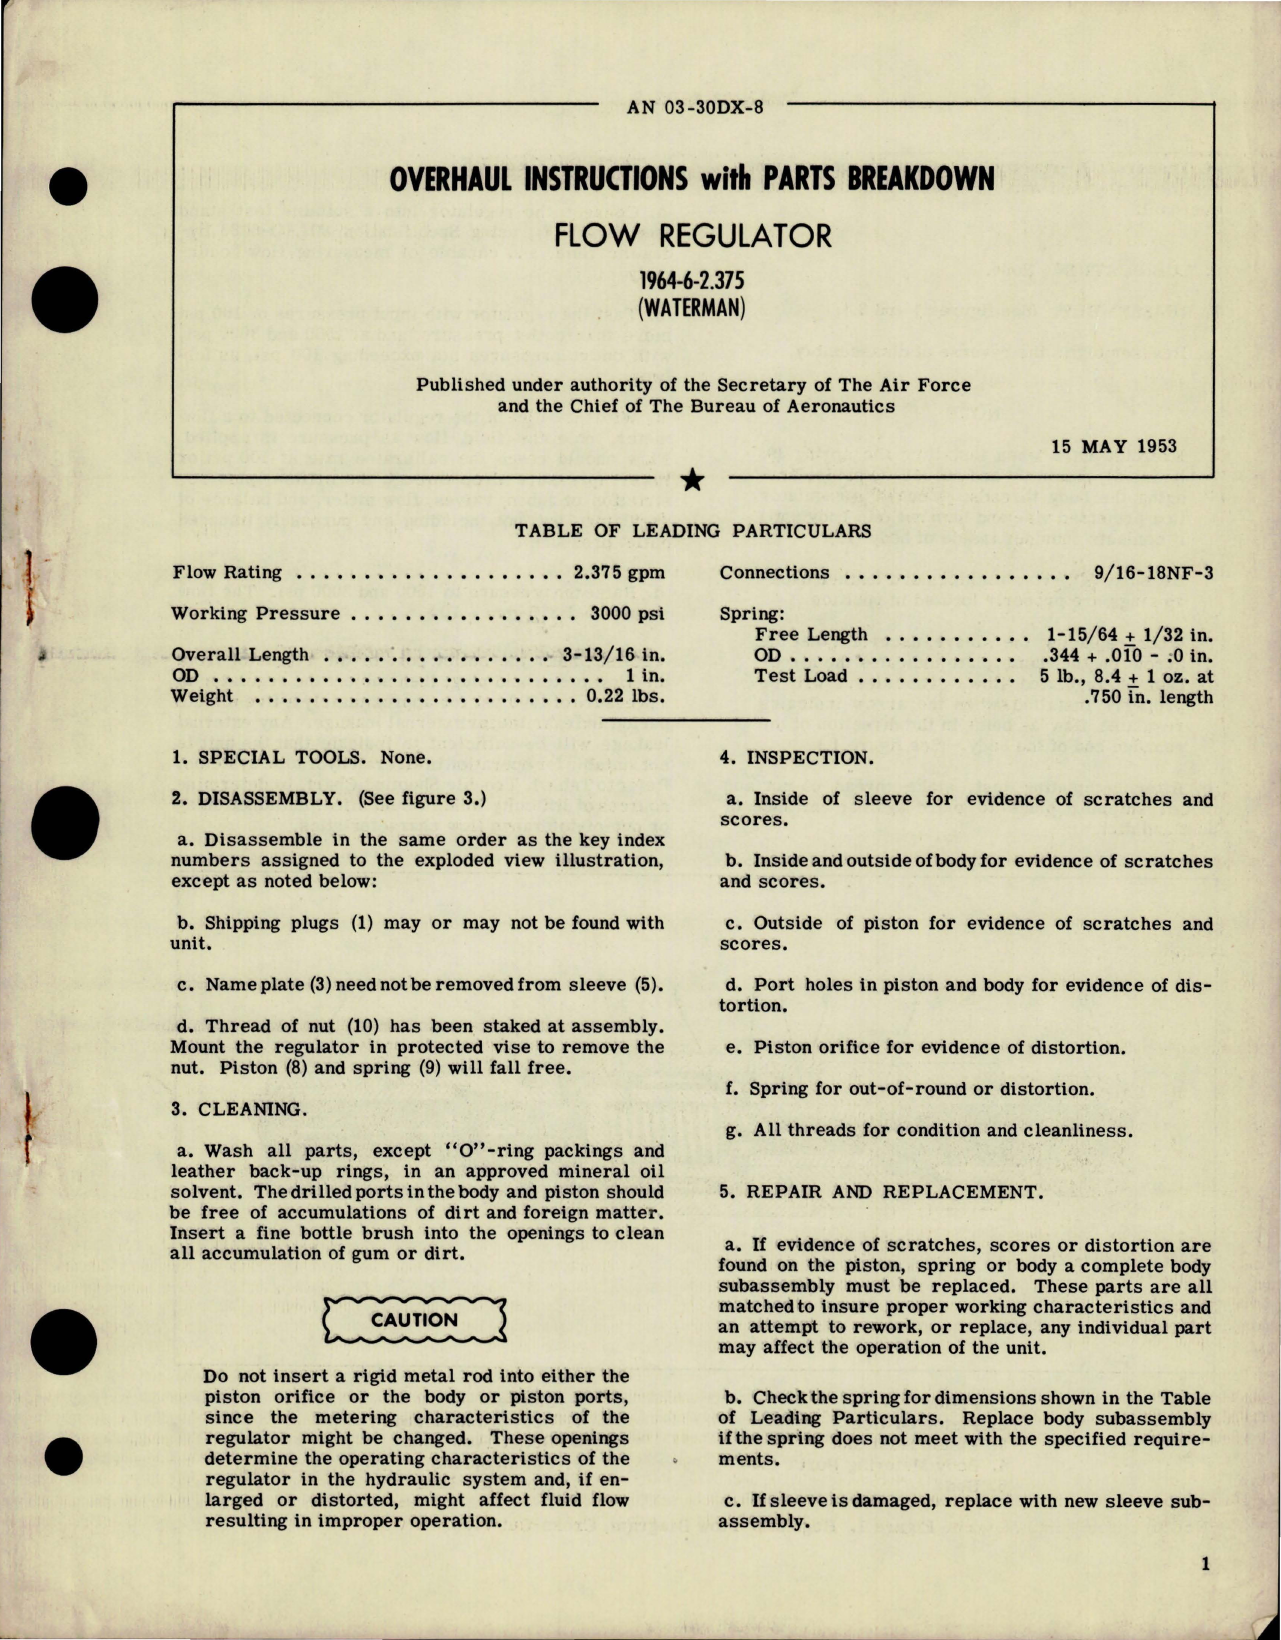 Sample page 1 from AirCorps Library document: Overhaul Instructions with Parts Breakdown for Flow Regulator - 1964-6-2.375 